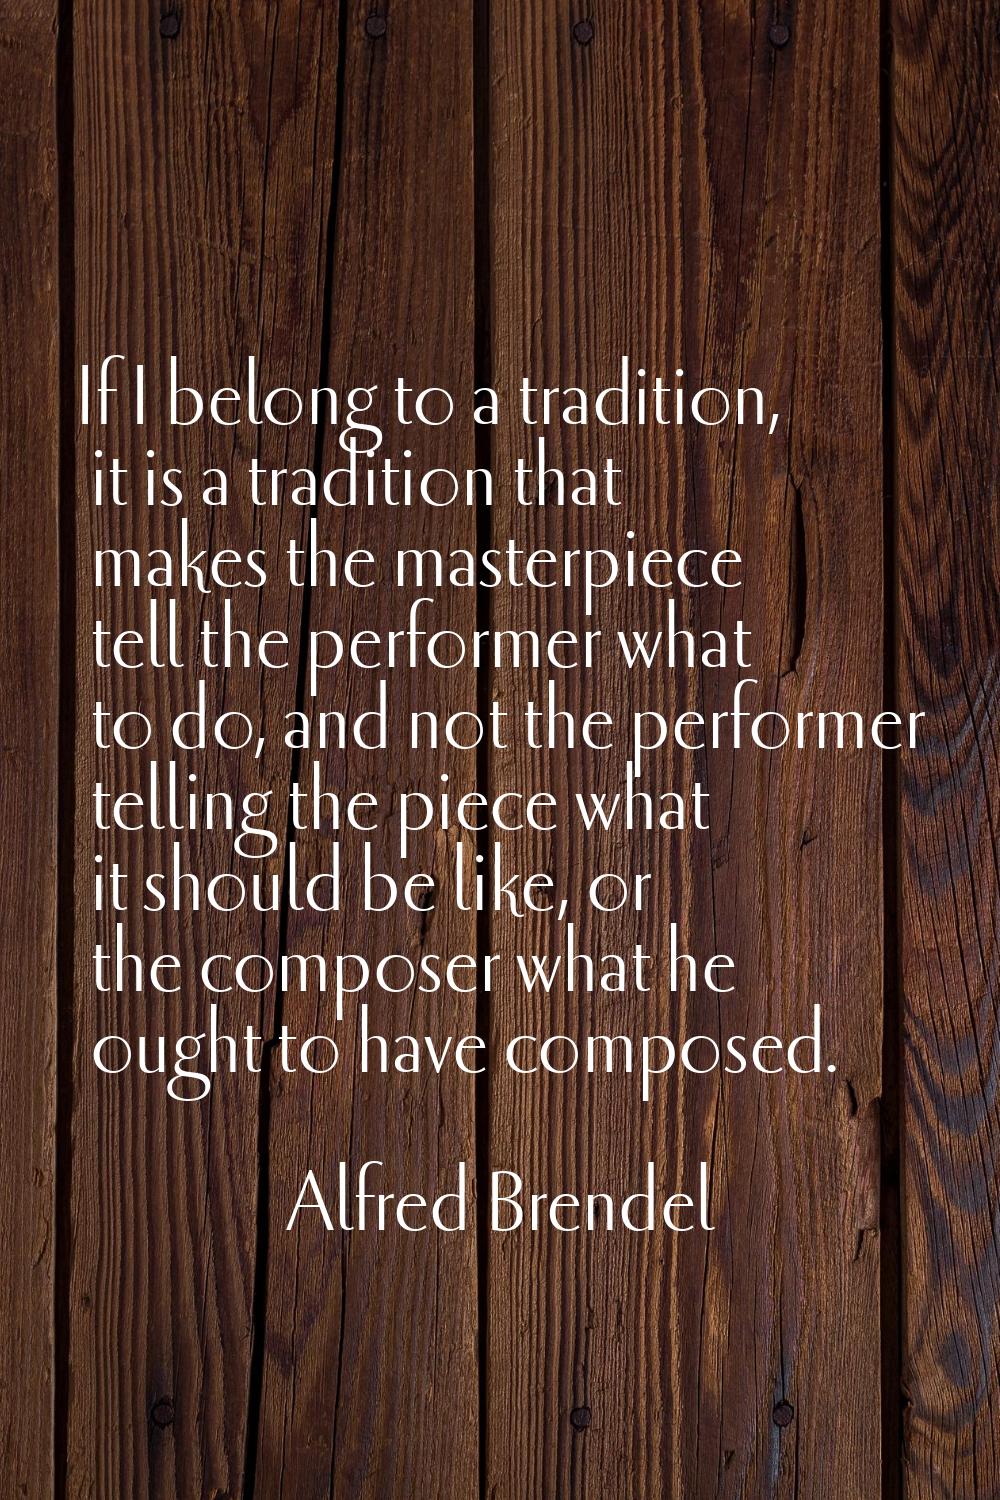 If I belong to a tradition, it is a tradition that makes the masterpiece tell the performer what to